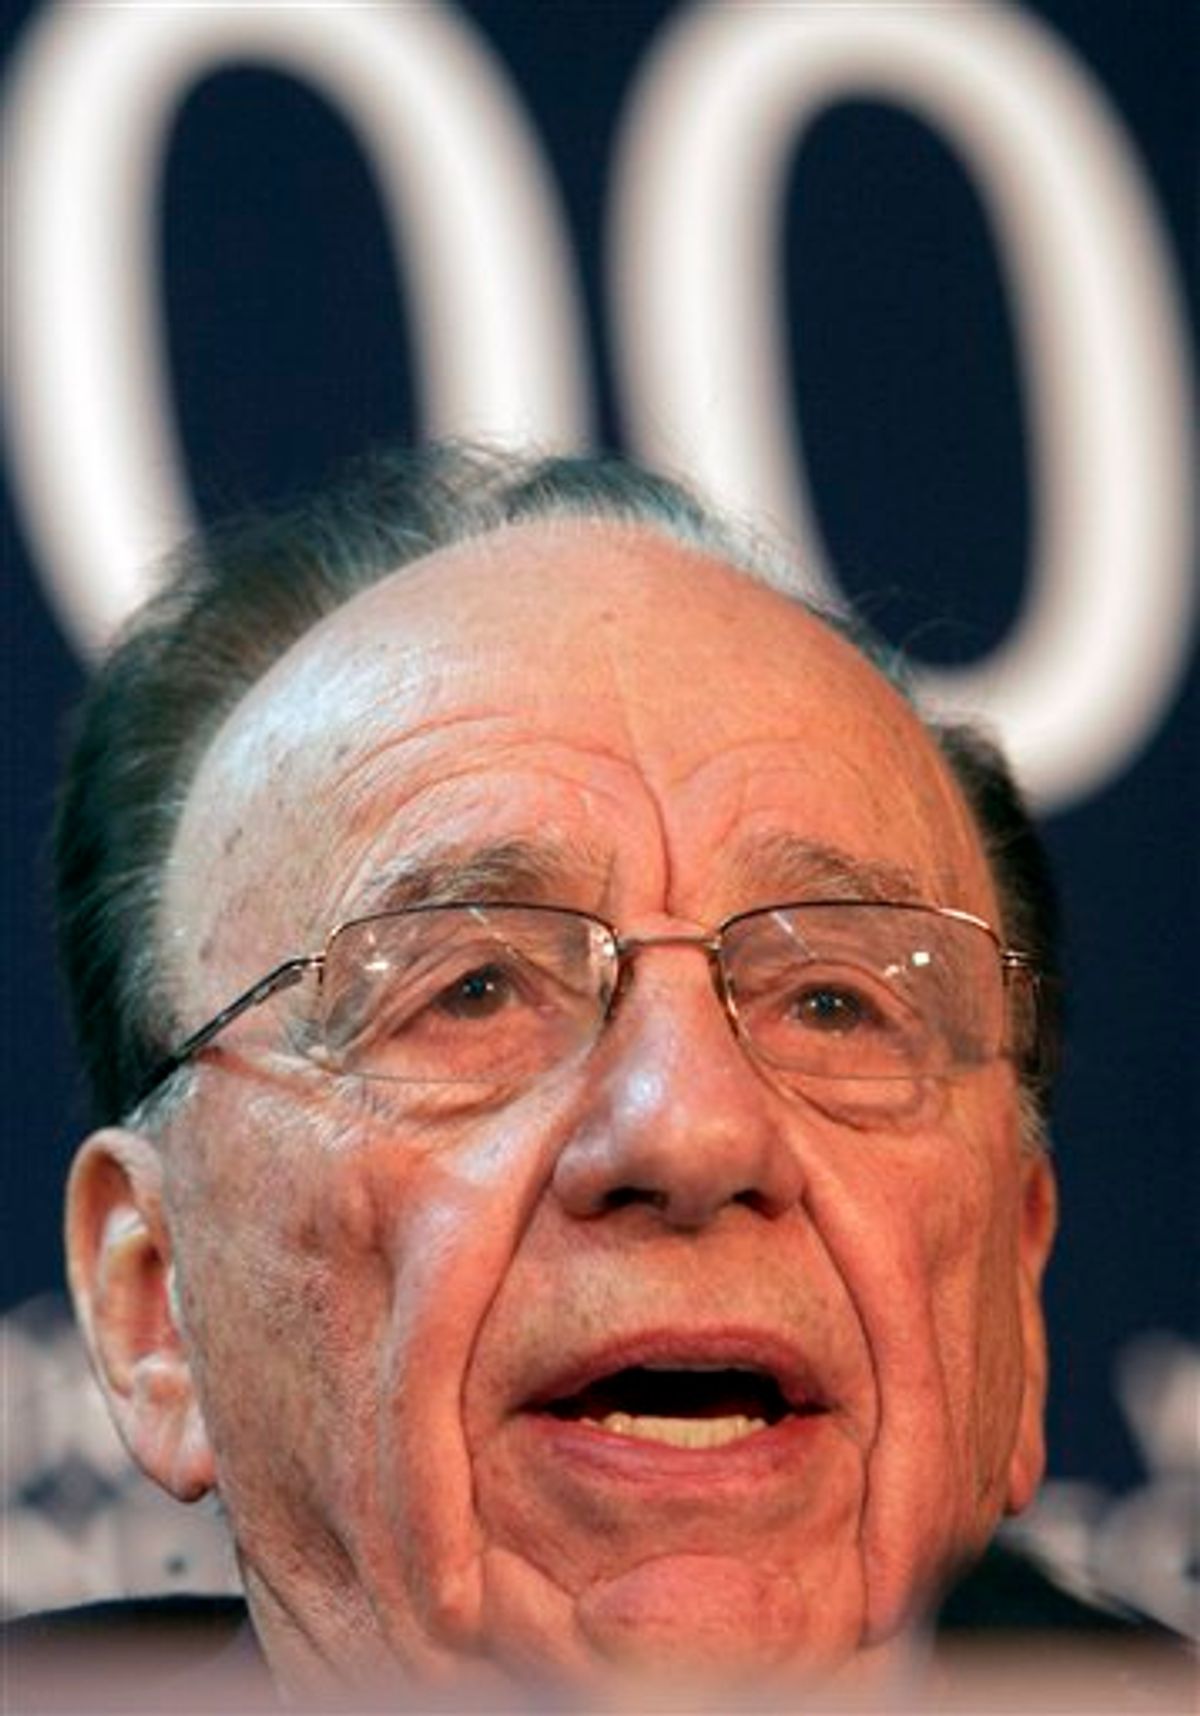 FILE - In this Jan. 28, 2009 file photo, Chairman and CEO of News Corporation, USA, Rupert Murdoch speaks during a media conference at the World Economic Forum in Davos, Switzerland.  "Good programing is expensive," Rupert Murdoch, told a shareholder meeting last month. "It can no longer be supported solely by advertising revenues."  (AP Photo/Virginia Mayo, file) (AP)